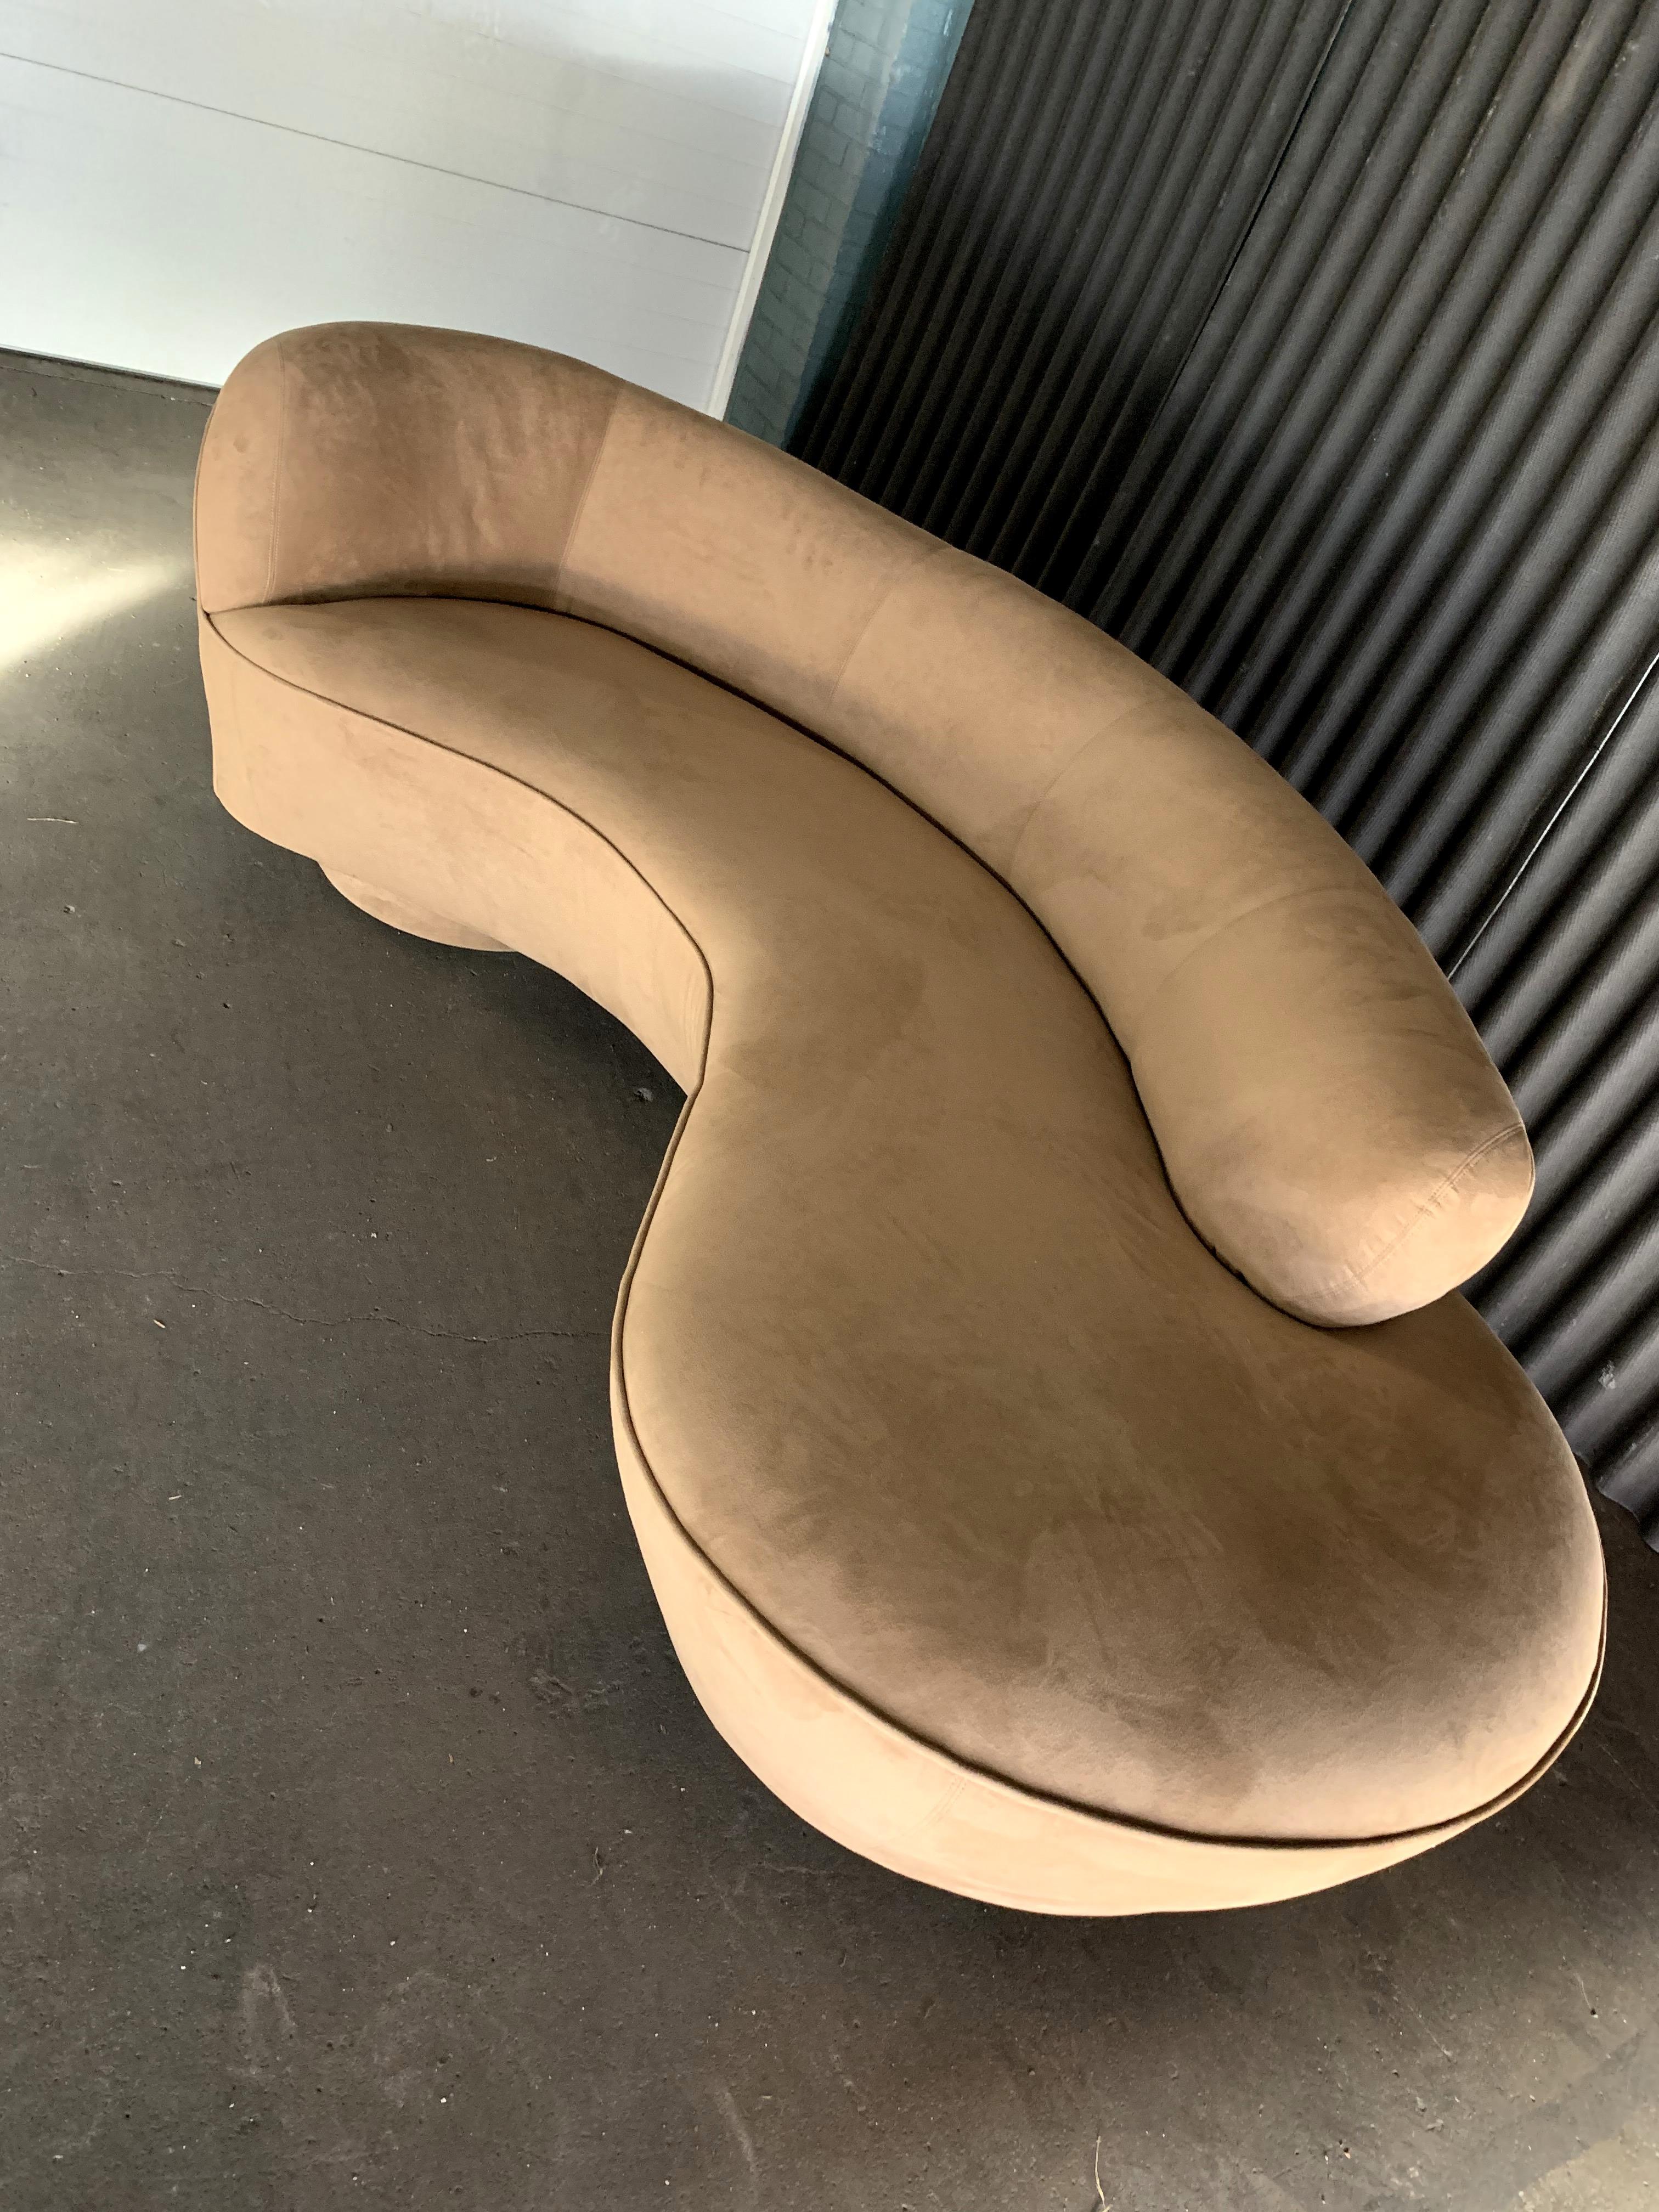 Gorgeous serpentine sofa by Designer, Vladimir Kagan for Directional.
In the original cocoa ultrasuede fabric, this sofa, with its companion piece listed separately, is in Fabulous condition. No visible signs of wear, anywhere on either